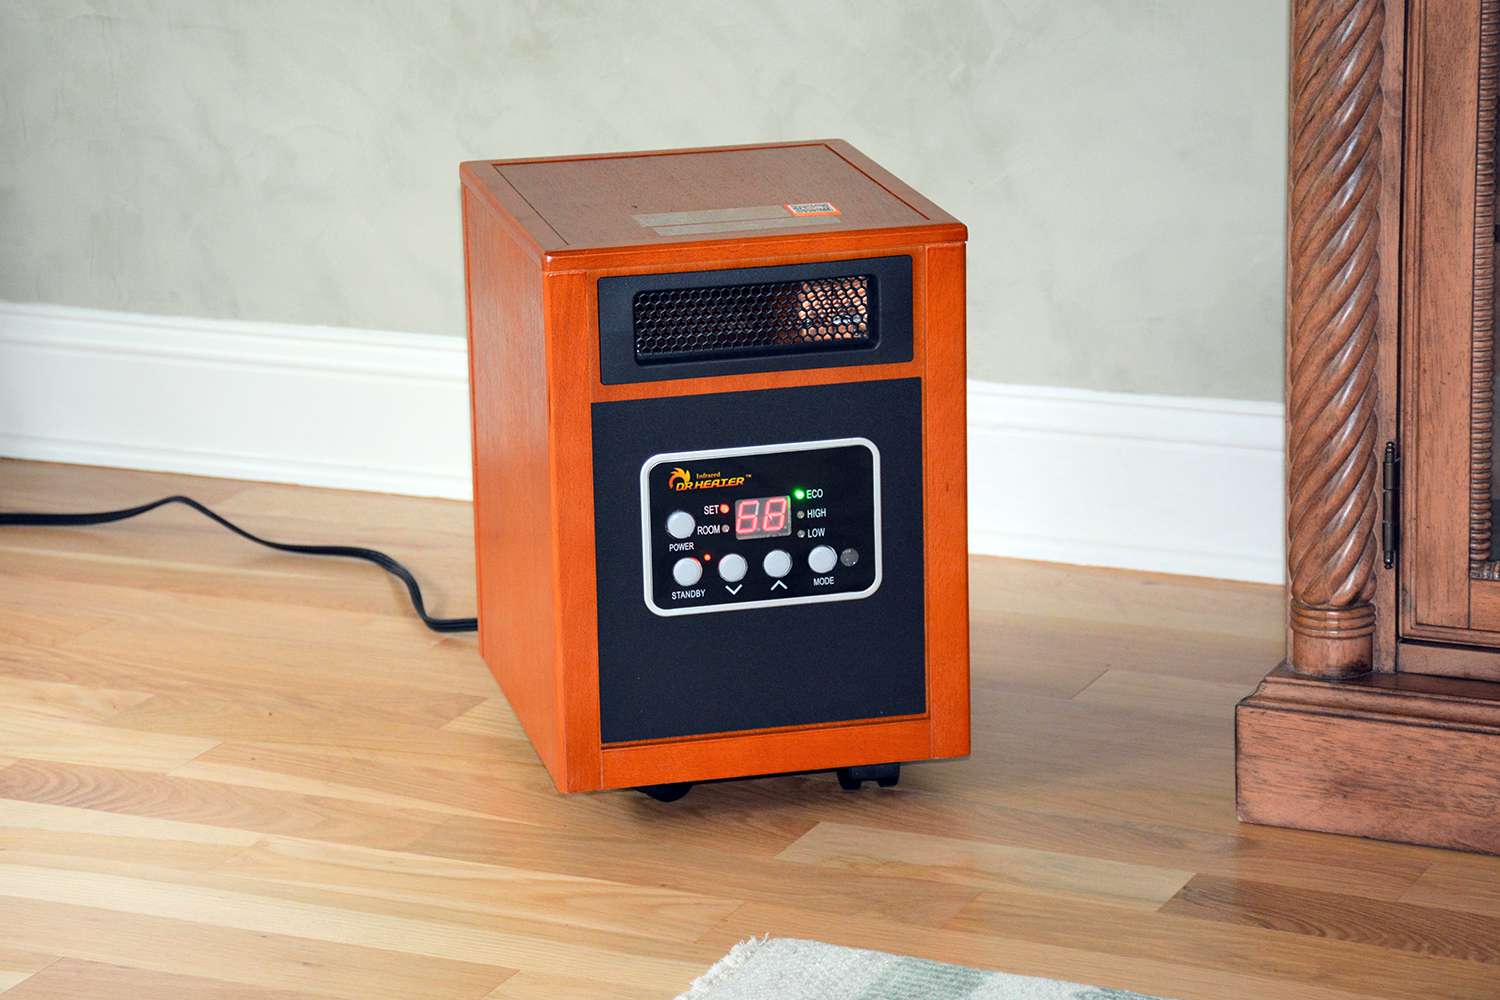 RED STONE RedStone Infrared Cabinet Heater Owner’s Manual